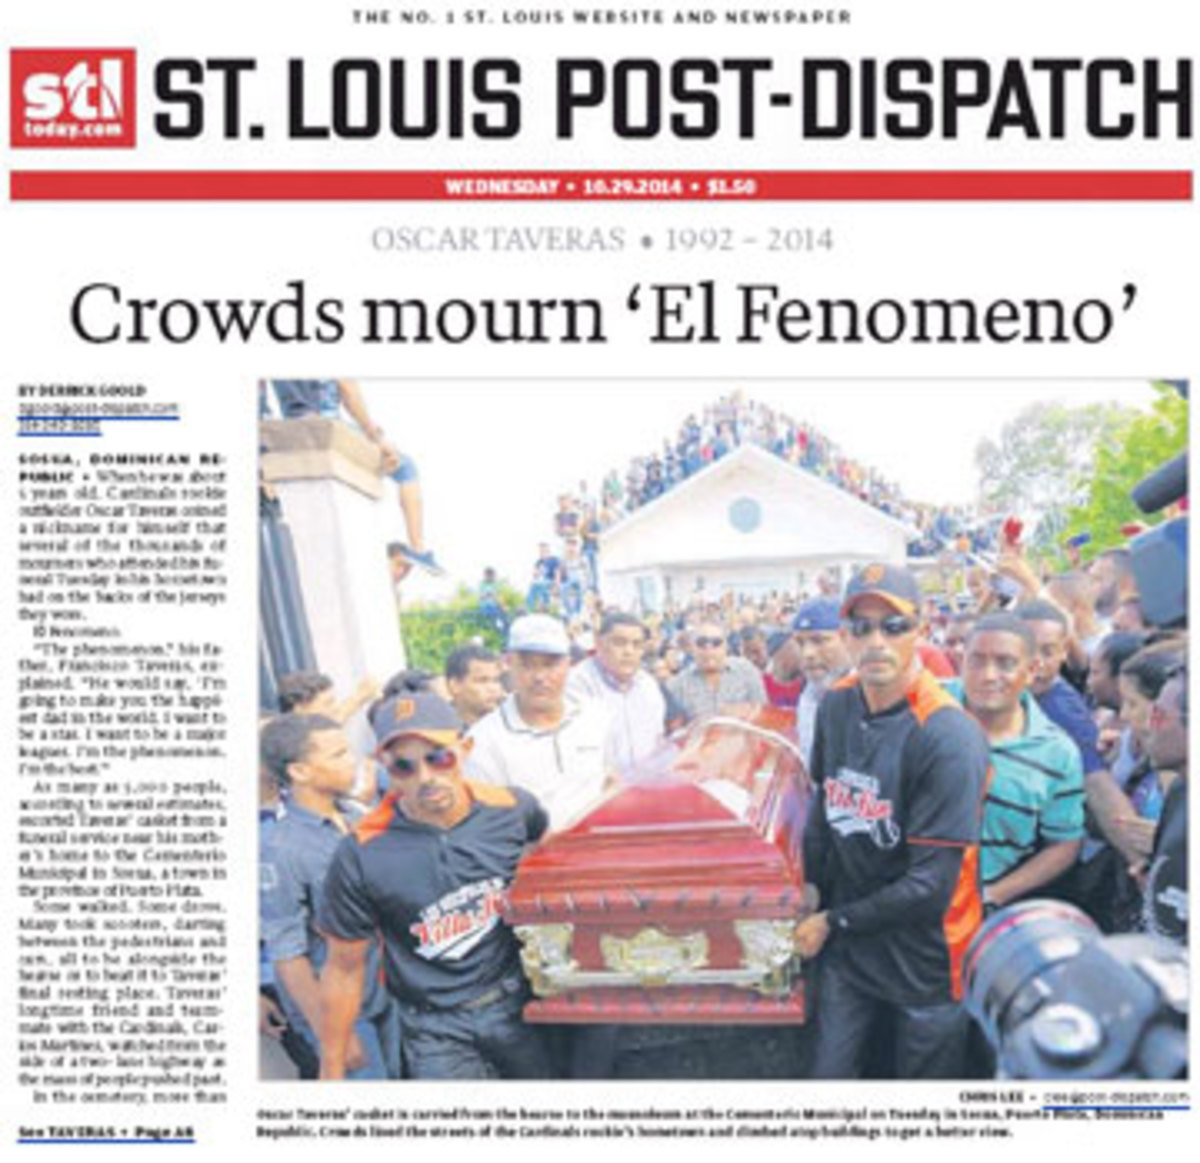 The Oct. 29 edition of the St. Louis Post-Dispatch featured the Taveras funeral on the front page. Click picture to read the story.